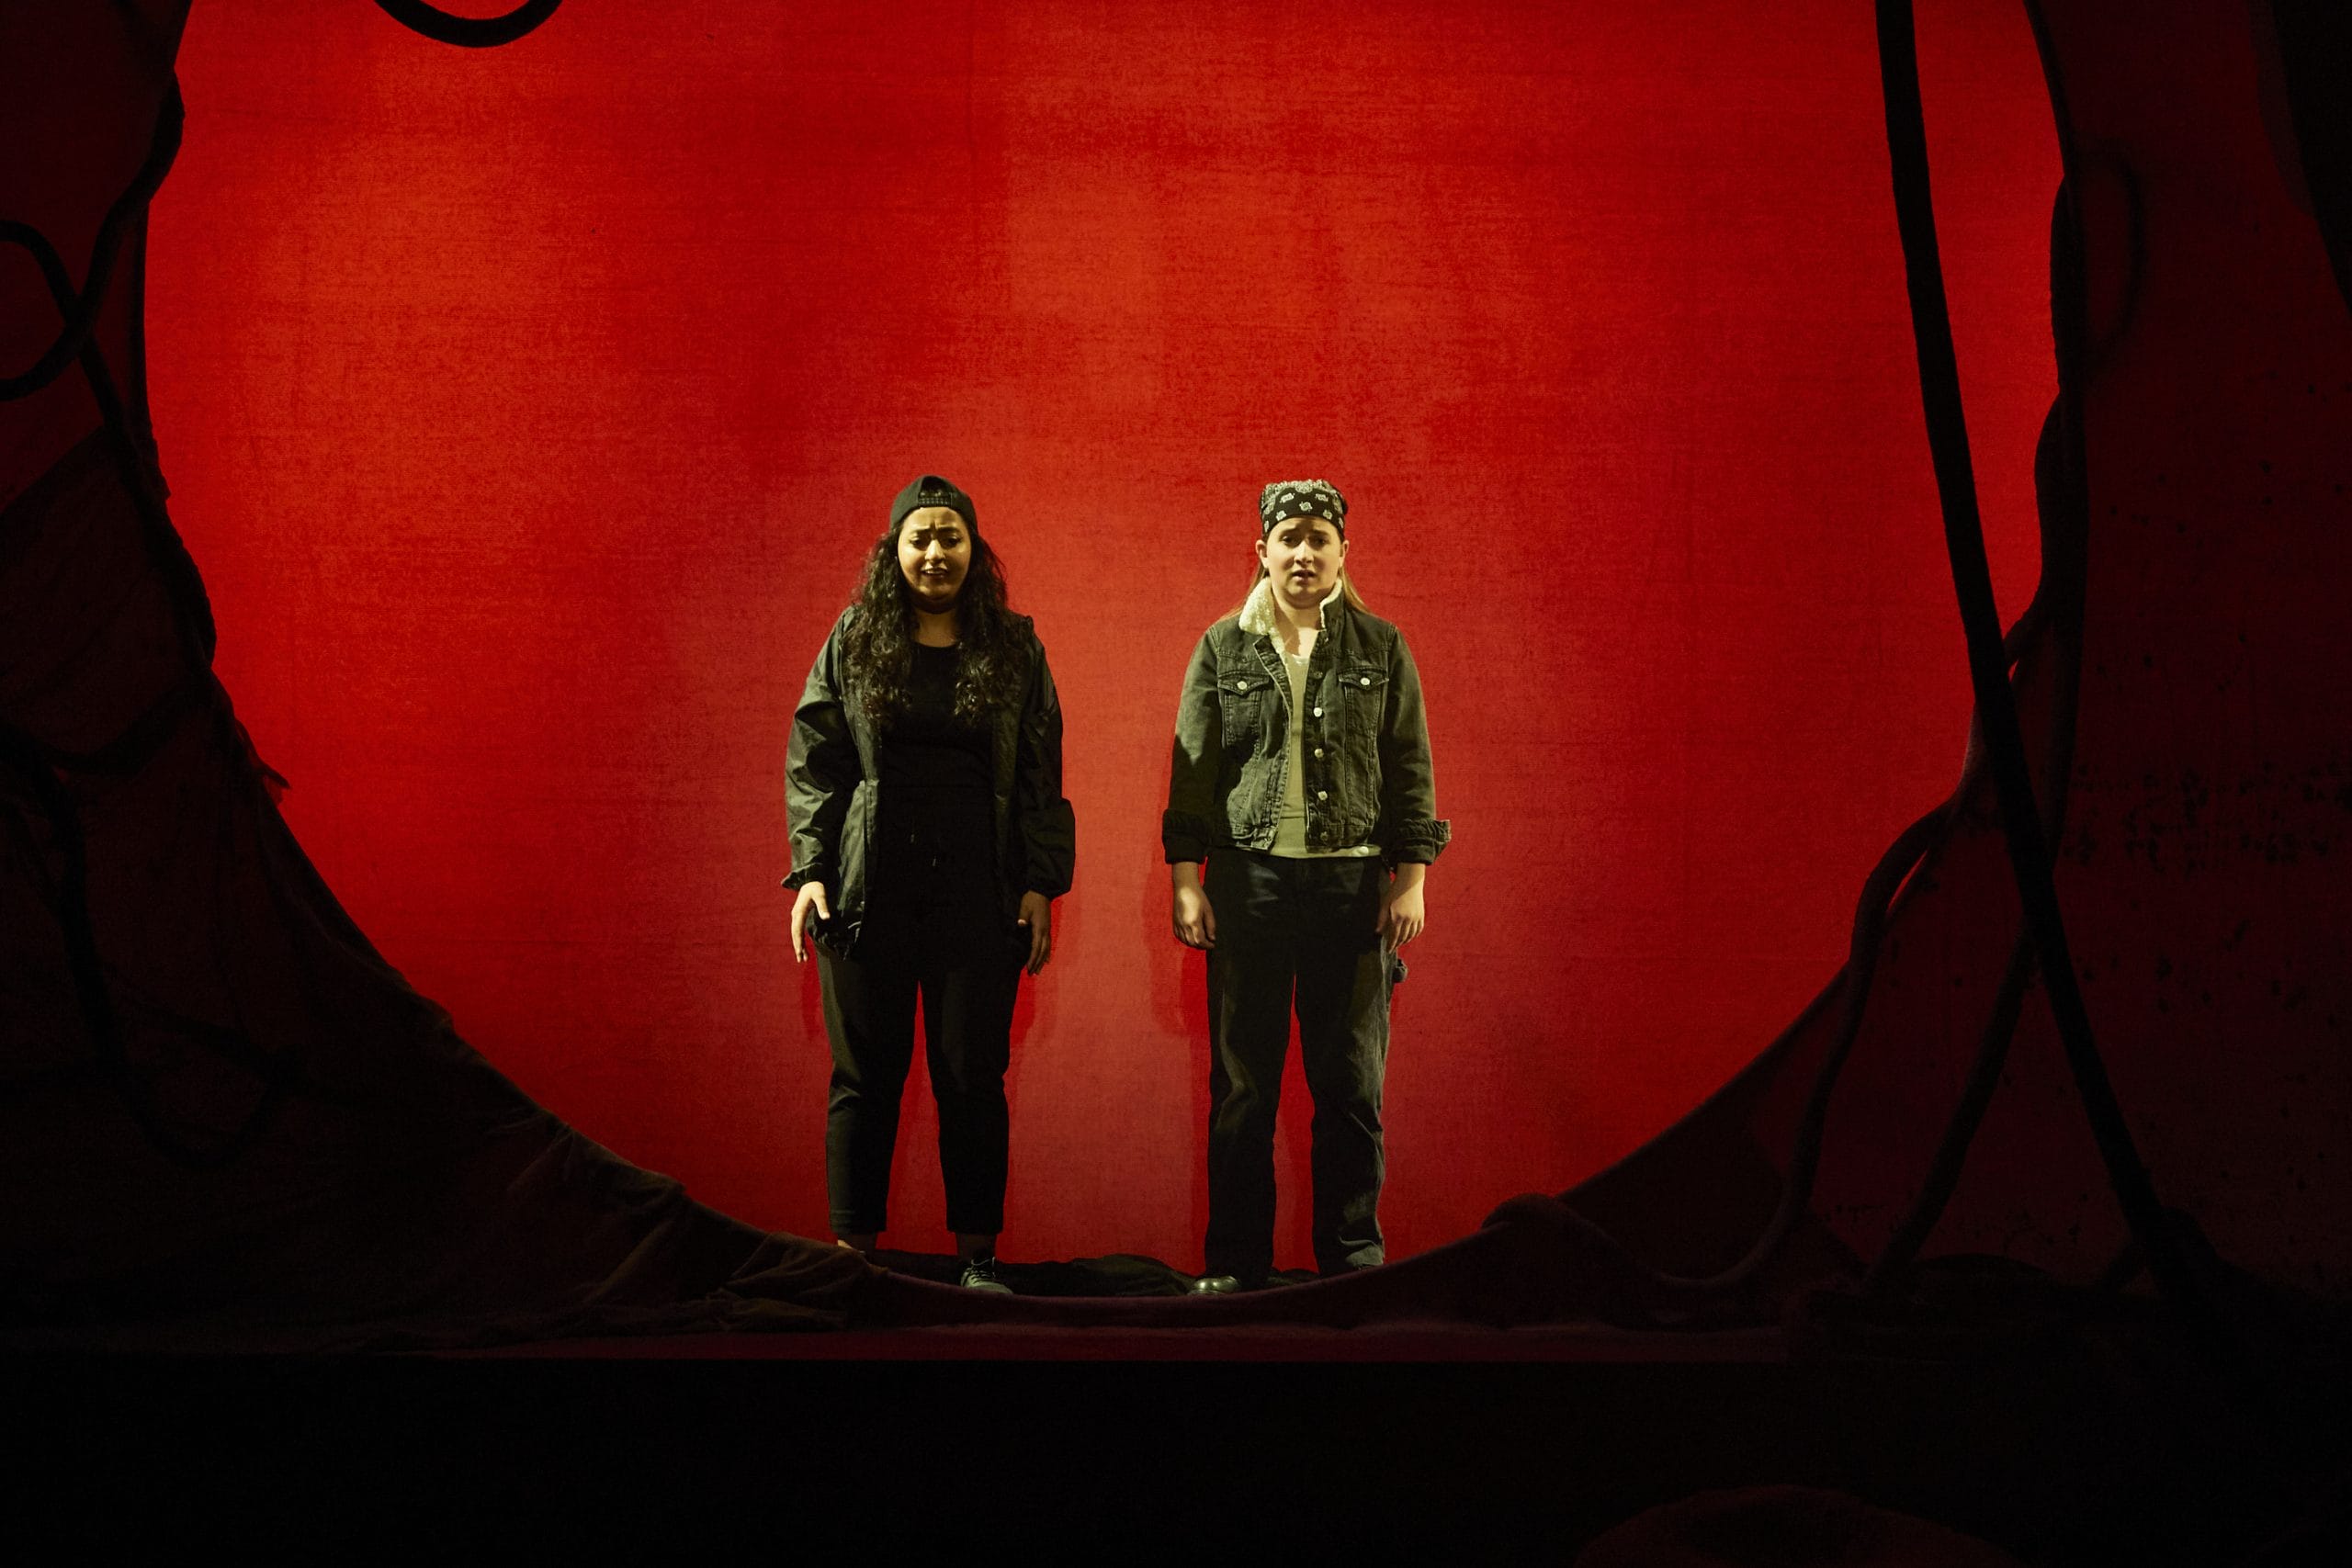 two actors stand on stage looking distressed at the audience with a red circle background